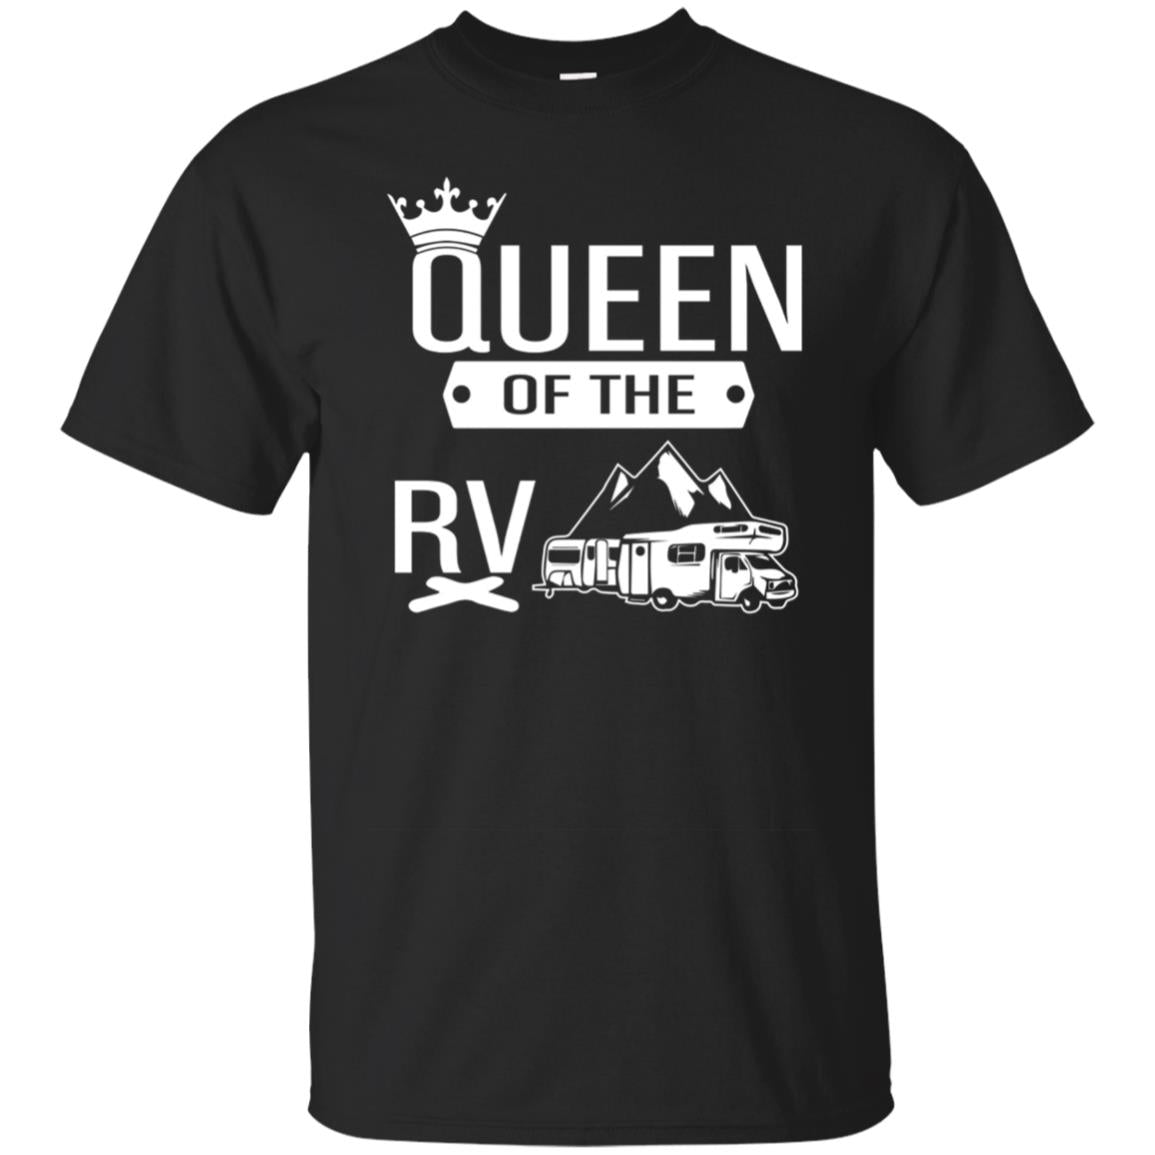 This Is How We Roll Rv T-shirt Queen Of Camper Rv Trailer